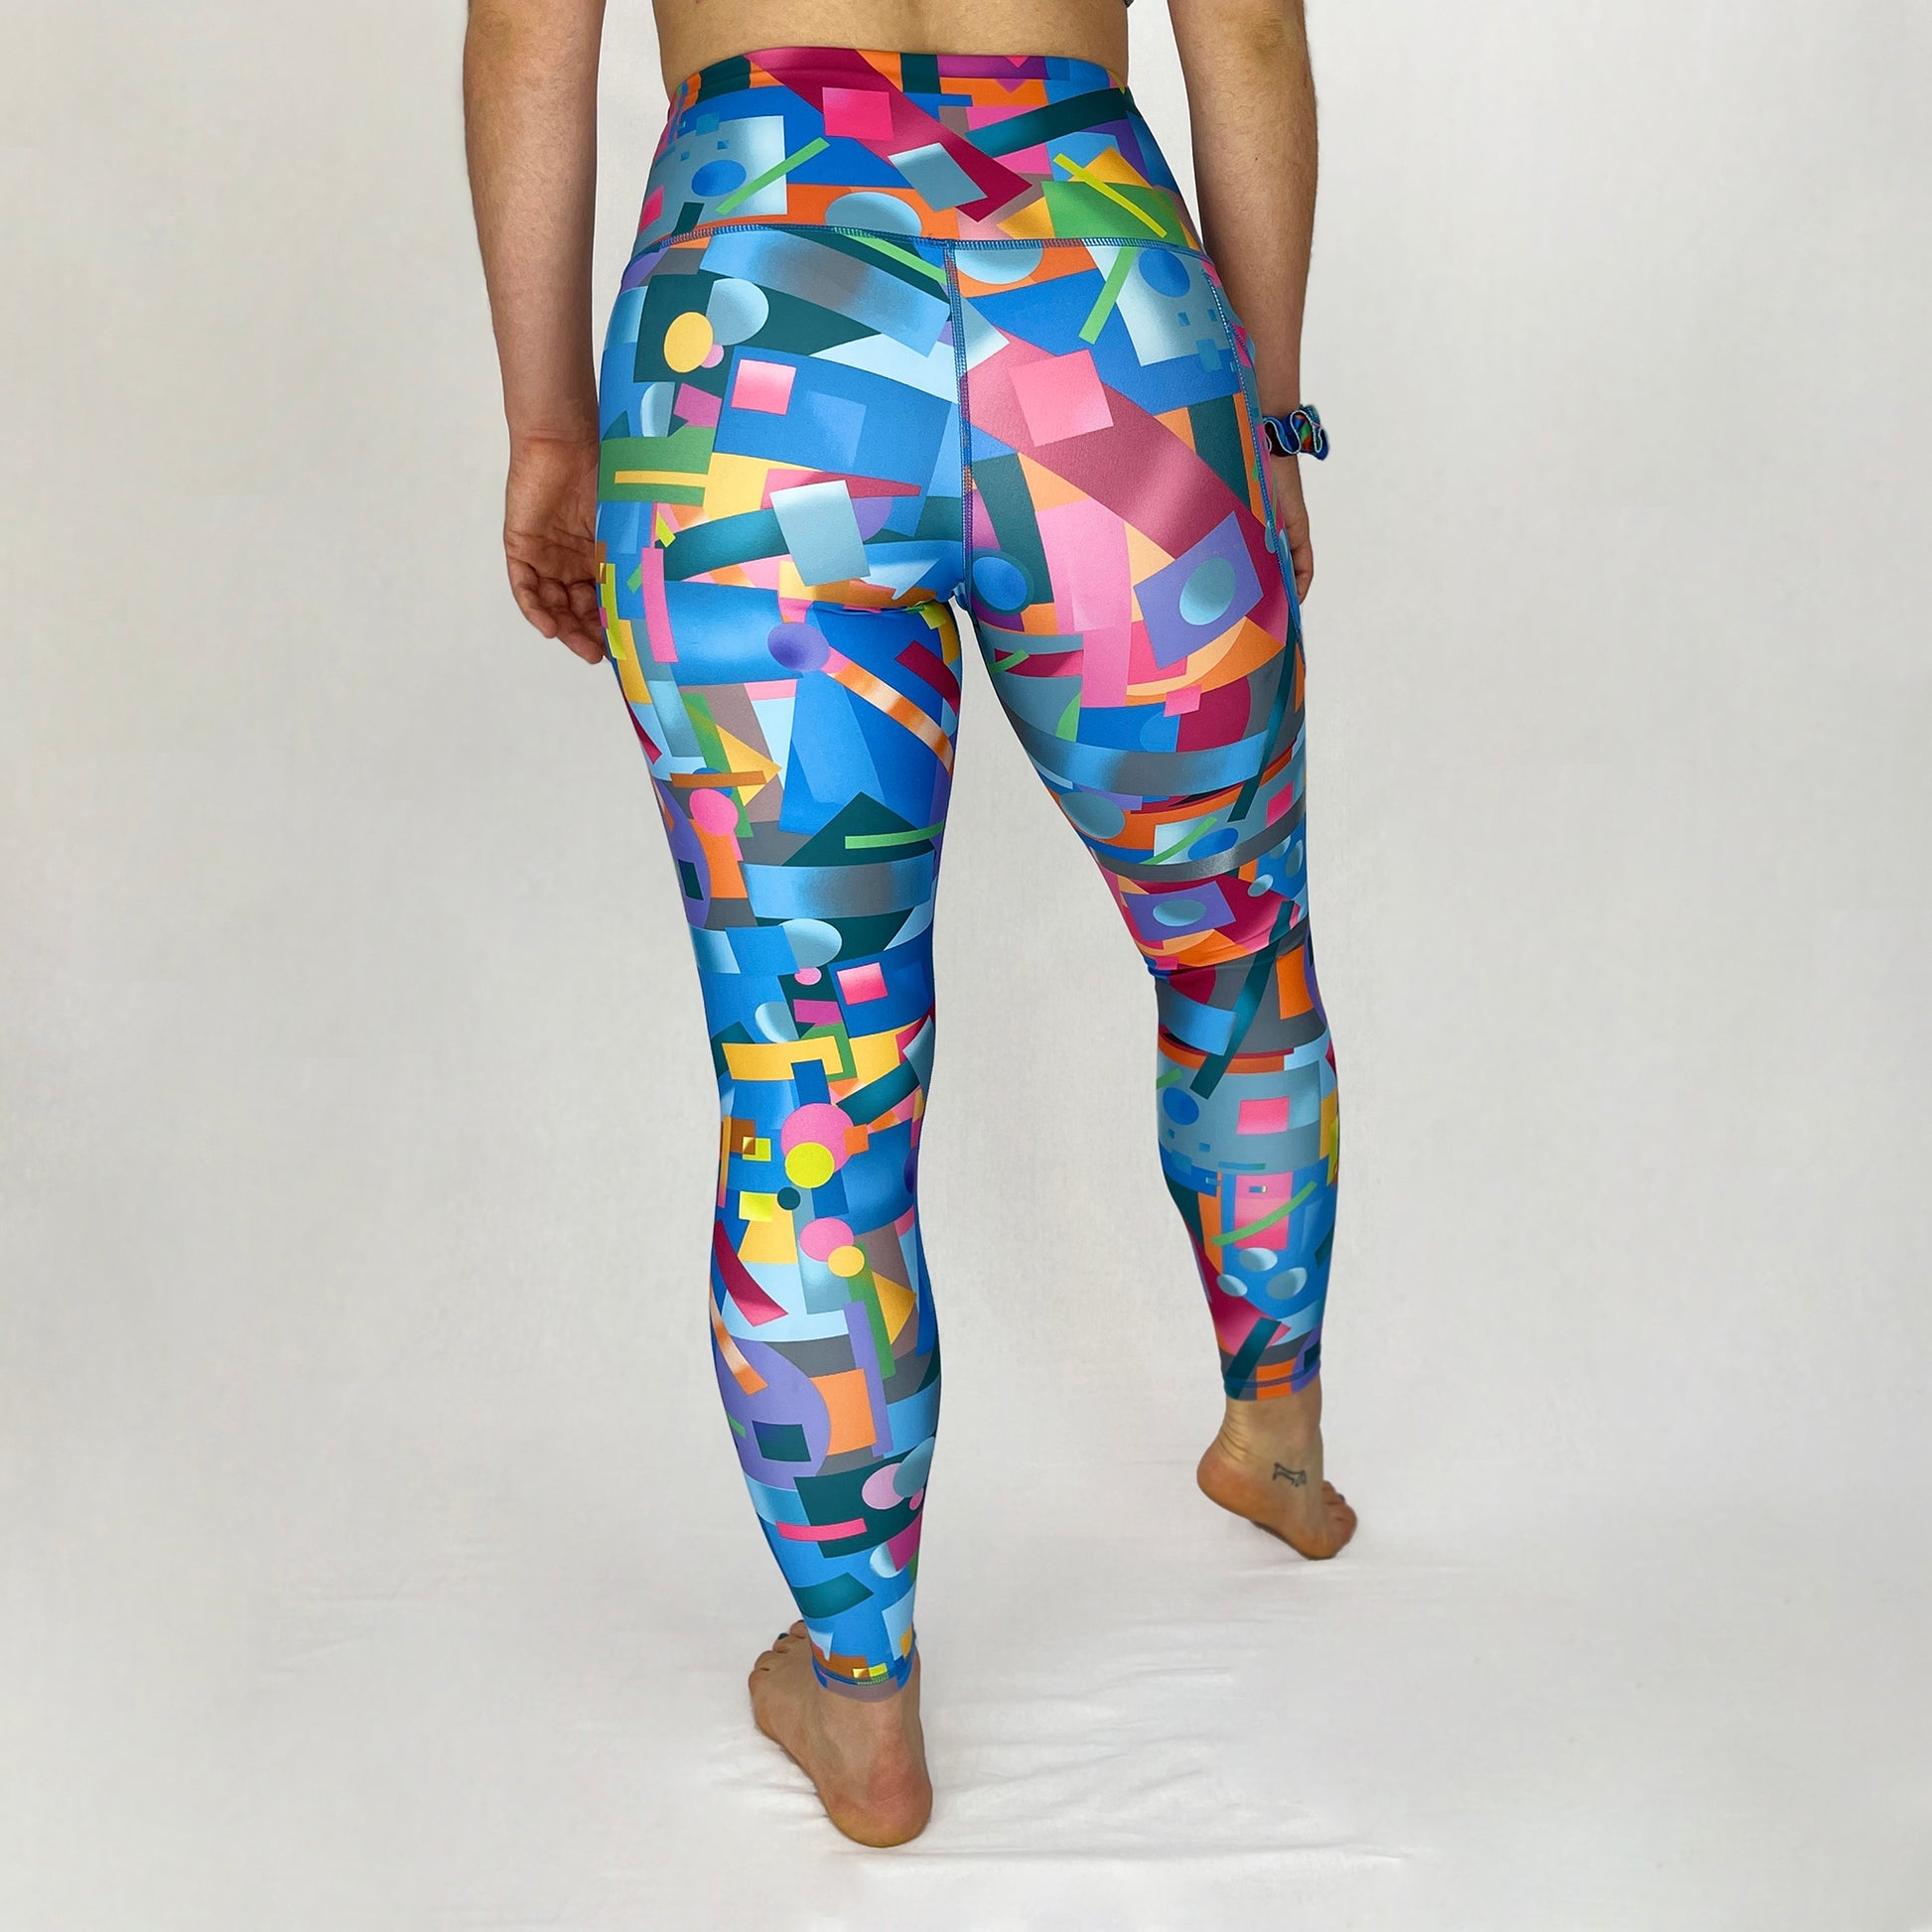 colourful high rise leggings with pockets made sustainably from recycled materials - geometric - back